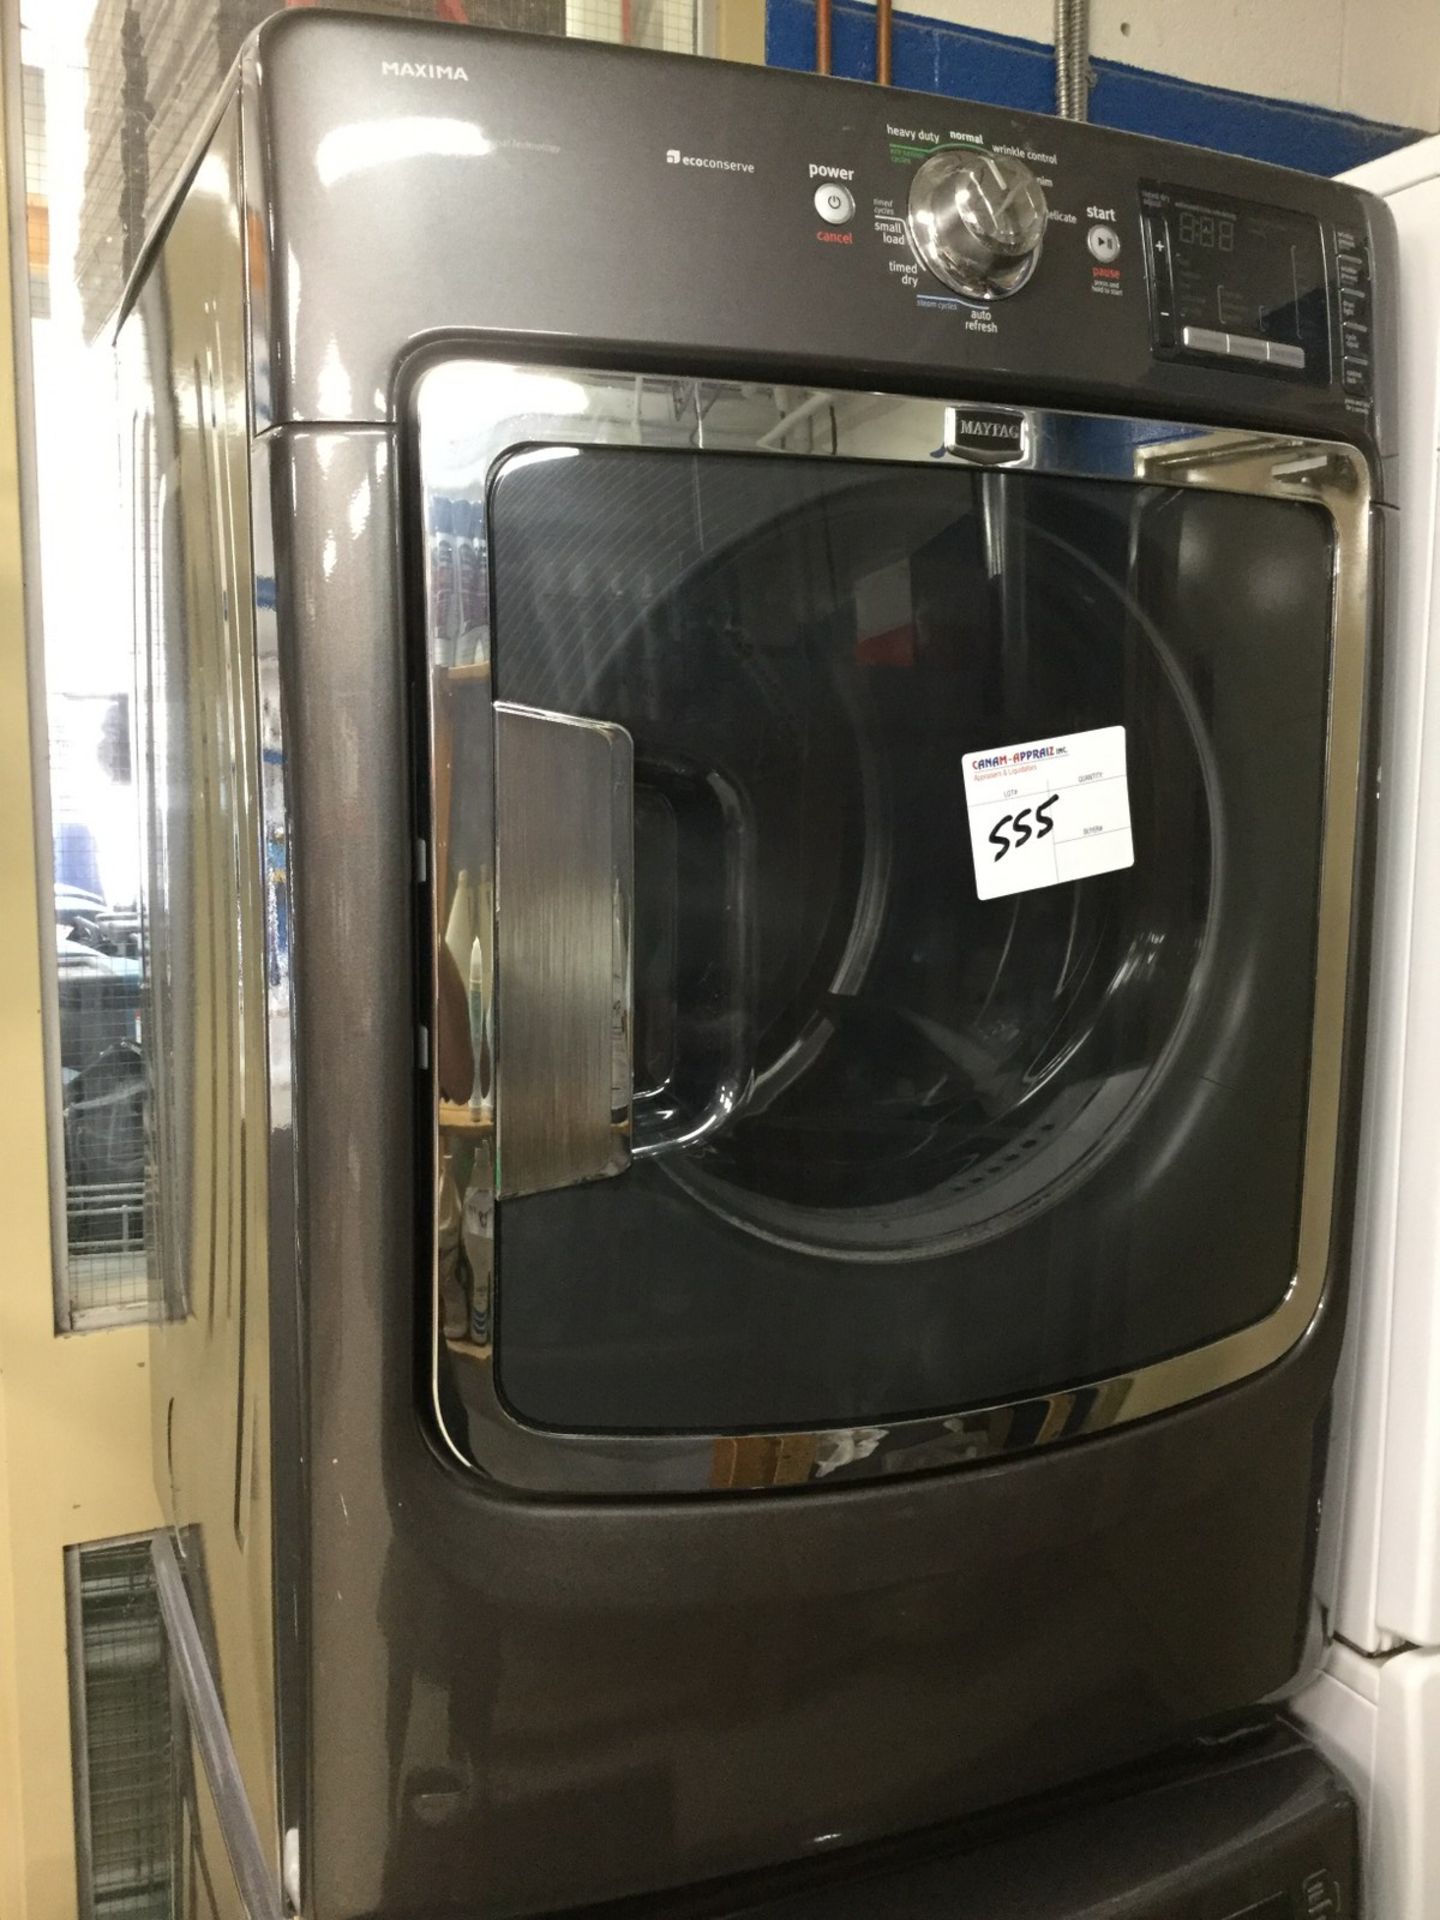 1 X MATAG - MAXIMA COMMERCIAL DRYER - MODEL # YMED60000XG0